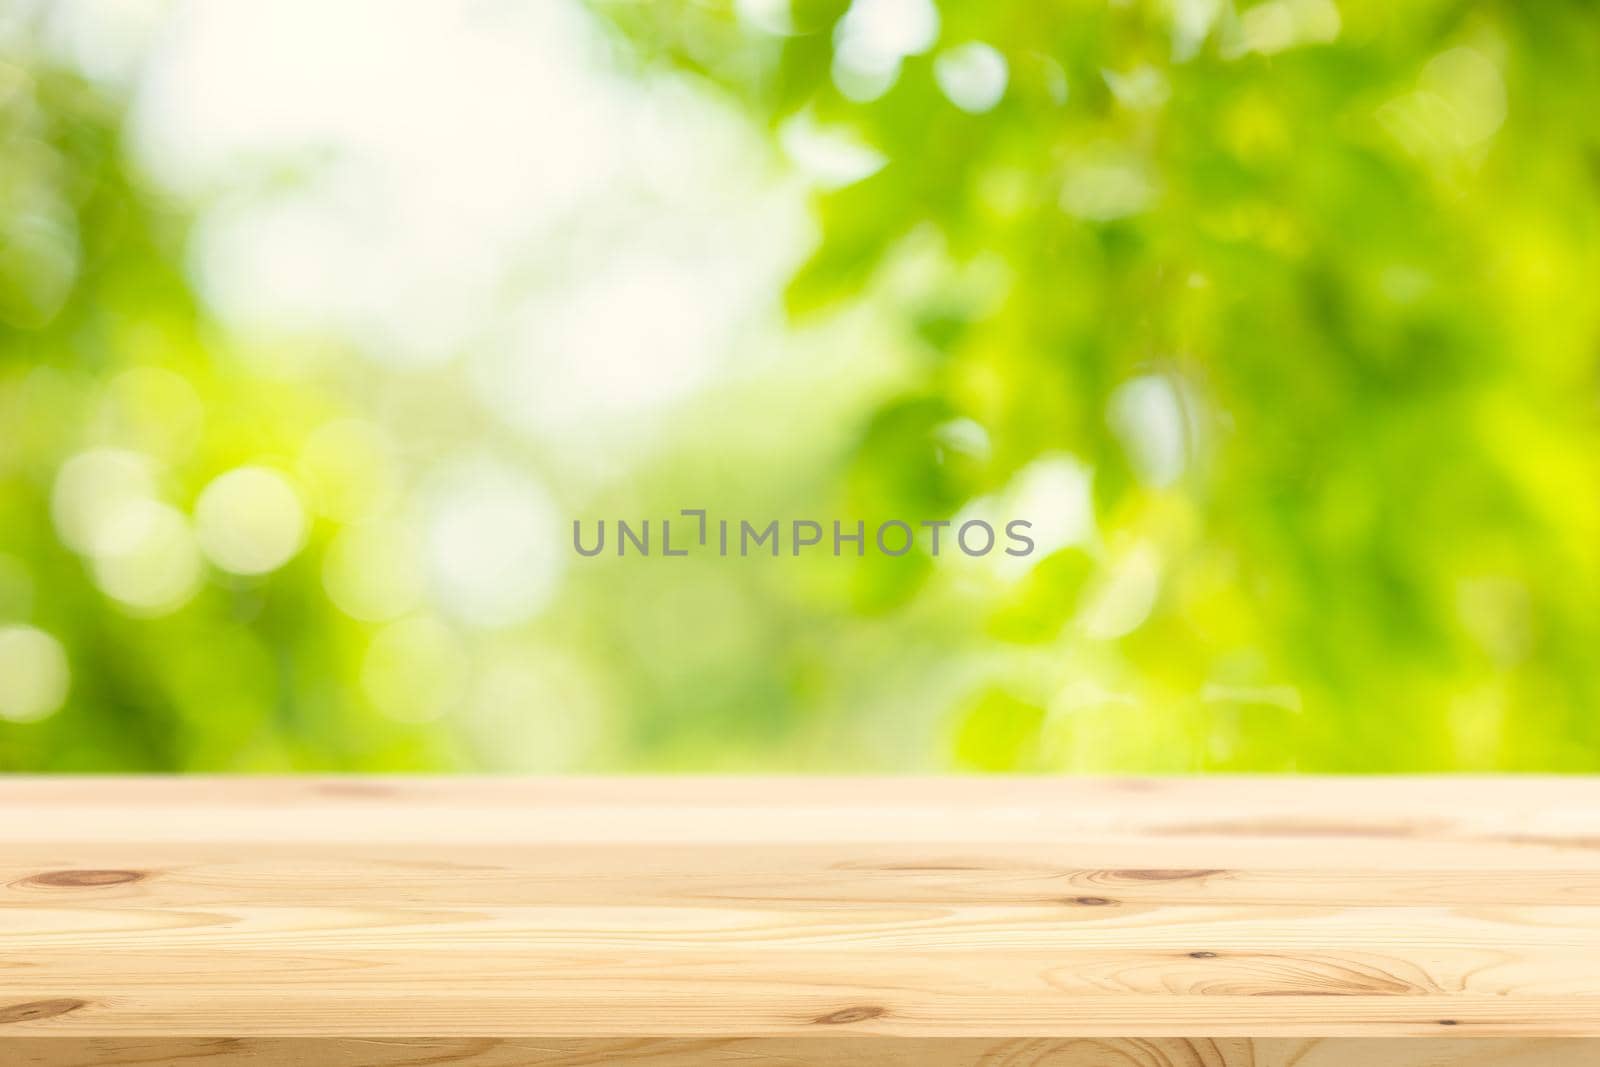 Blur green garden nature background with wooden table space for products advertising montage overlay template.